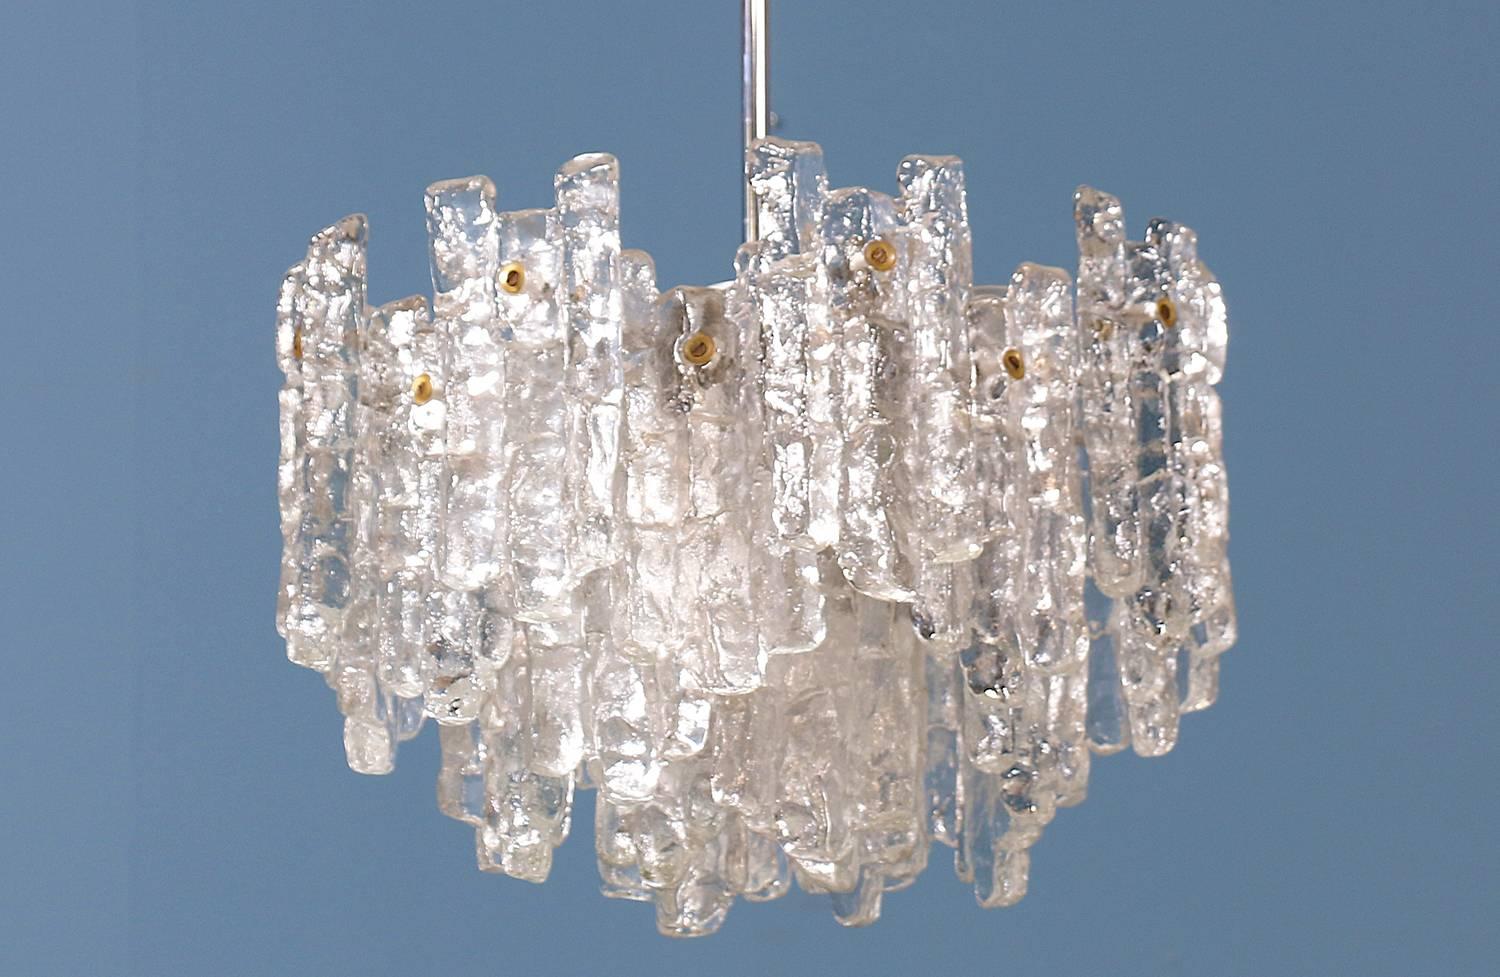 Mid-century Austrian Chandelier designed by Julius Theodore Kalmar and manufactured by Kalmar for the Soria collection circa 1960’s. This spectacular chandelier features icicle-like glass components that make up the shade. Nine light bulbs refract